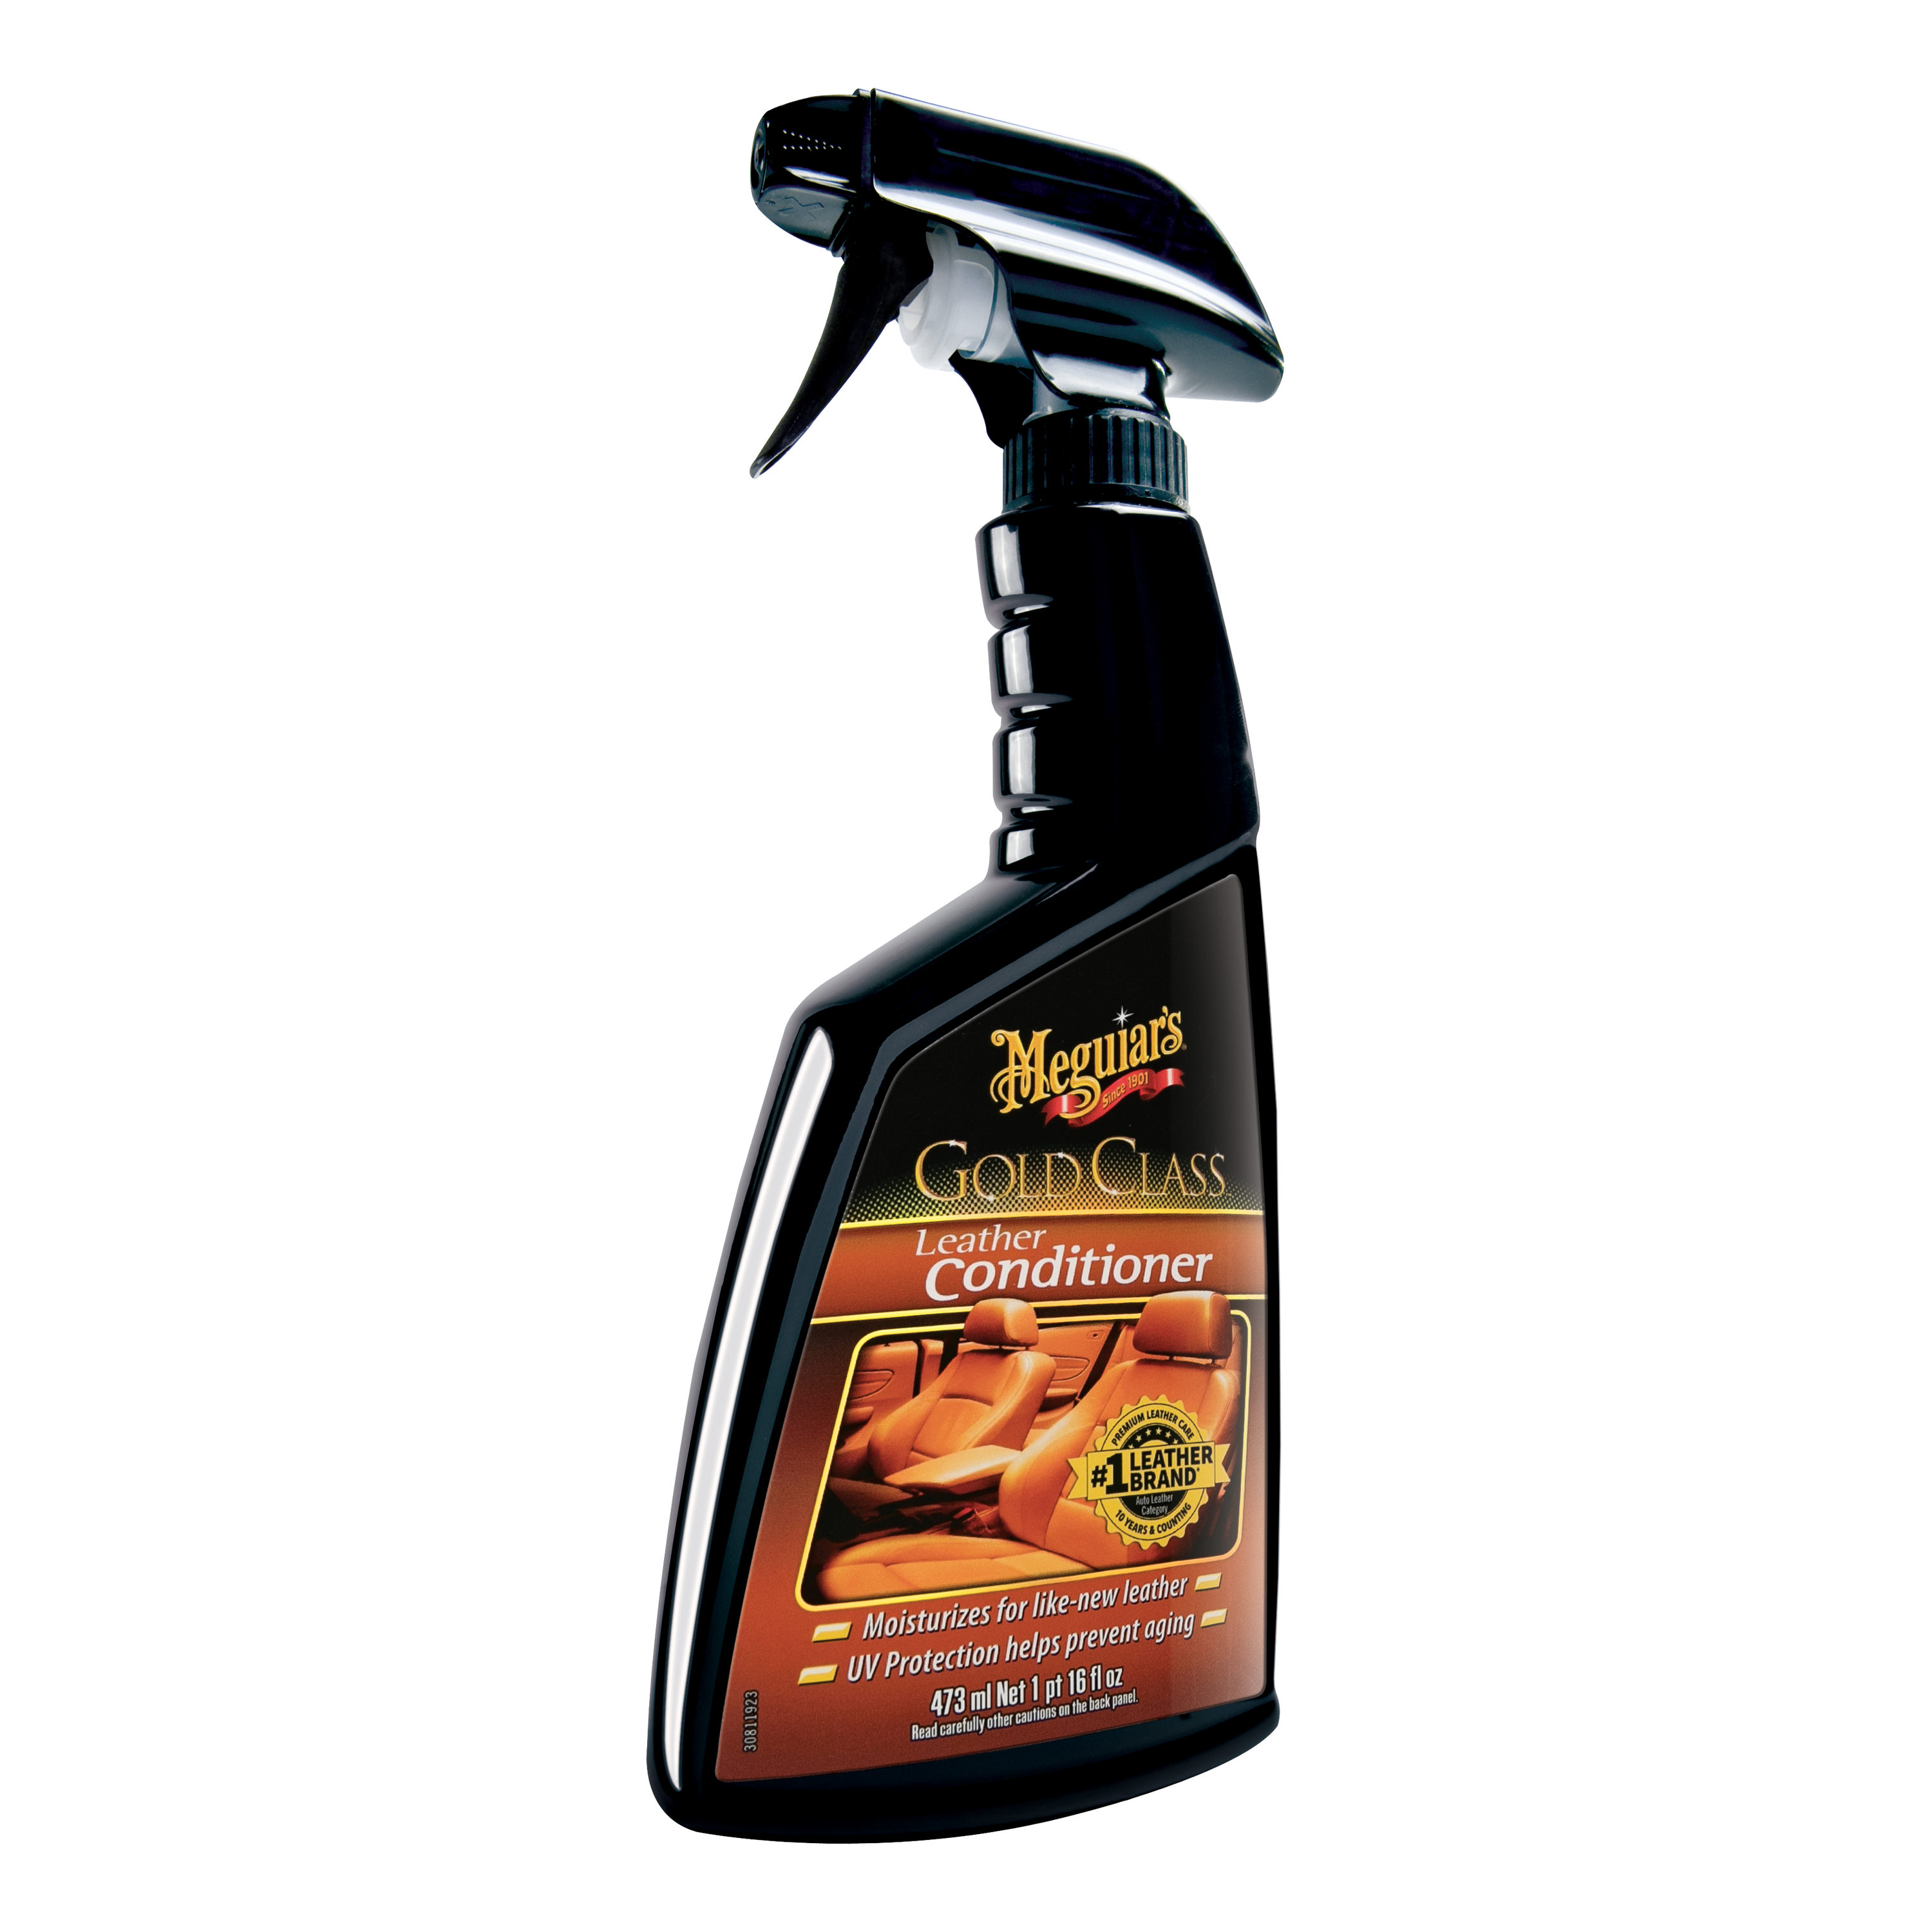 Meguiars Gold Class Leather Cleaner/Conditioner Review 